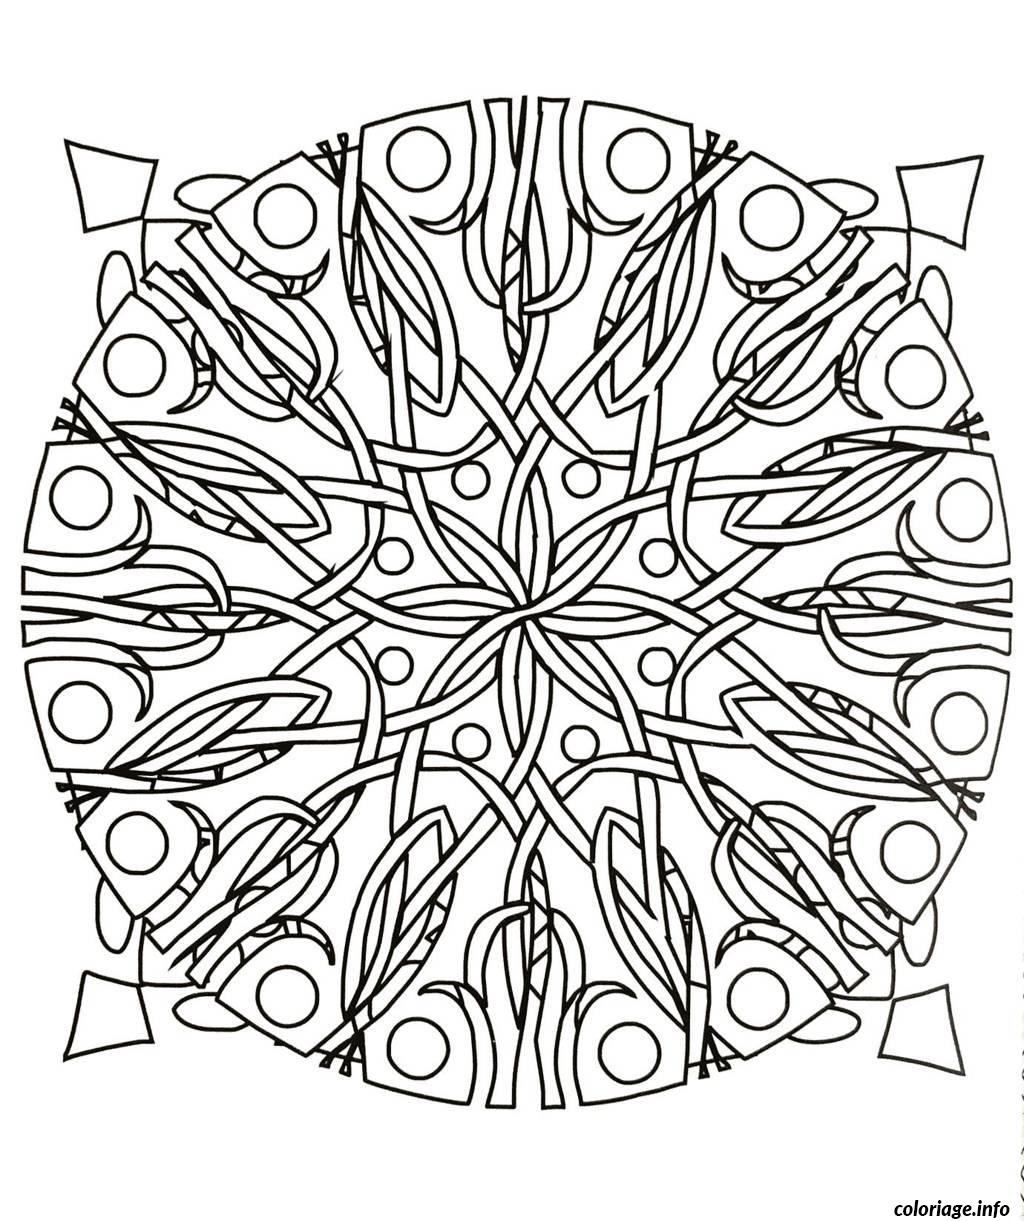 Coloriage Mandalas To Download For Free 14 dessin